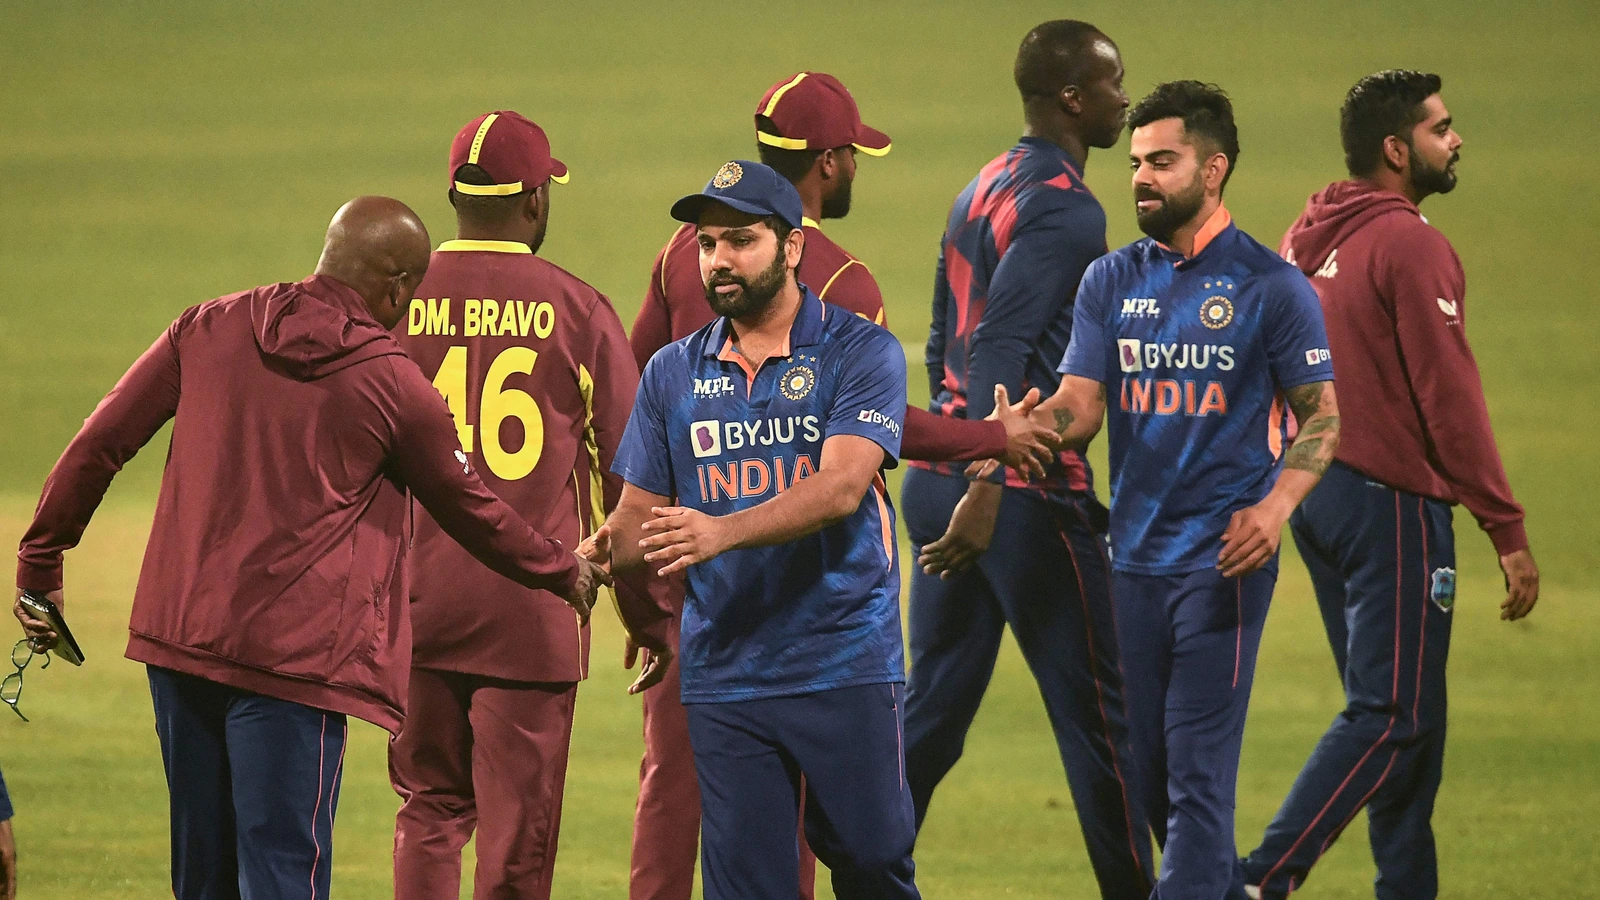 India vs. West Indies: How Batting Order Experiments Challenged an Easy Win